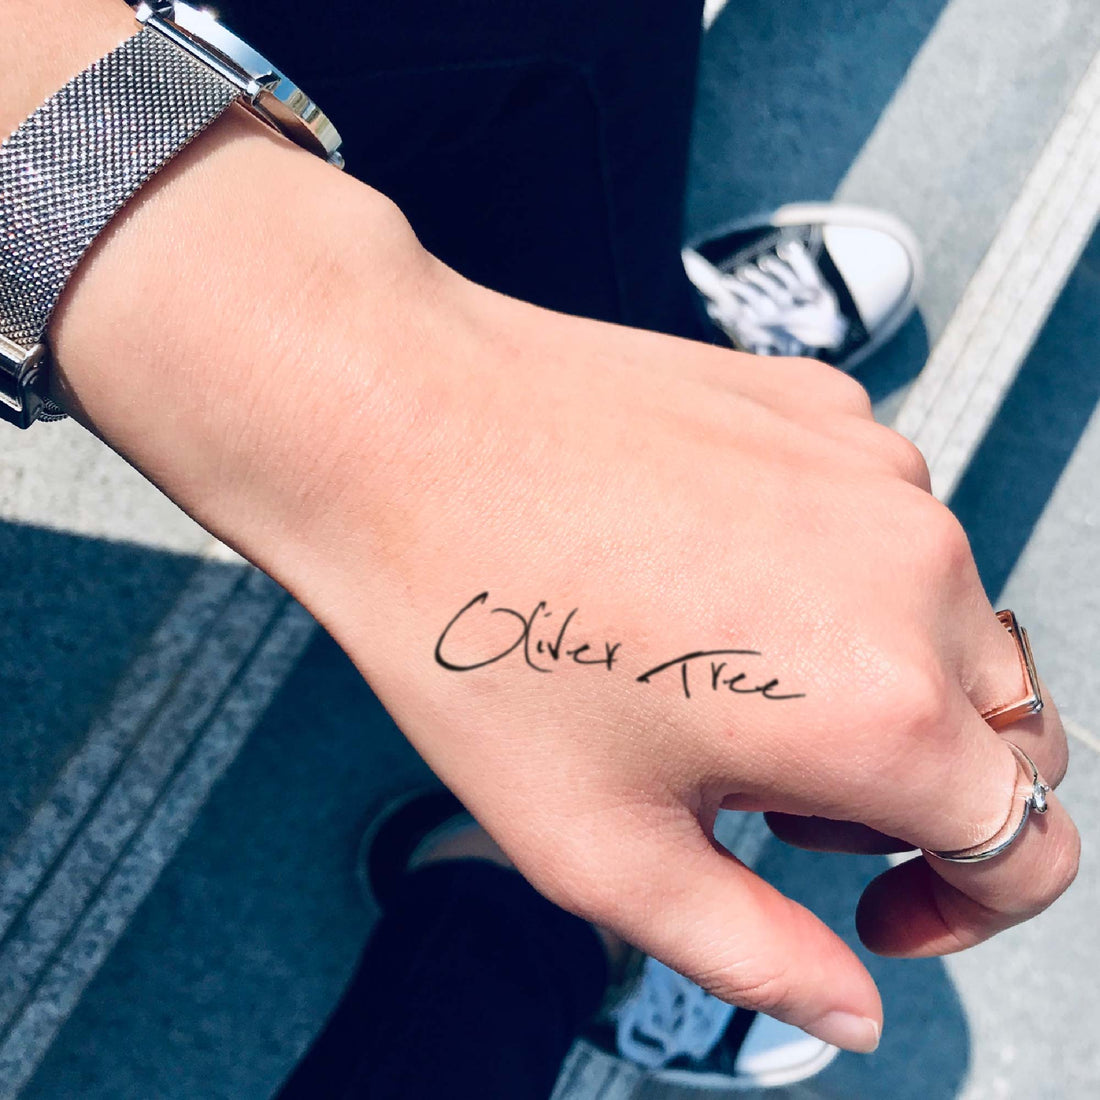 Oliver Tree custom temporary tattoo sticker design idea inspiration meanings removal arm wrist hand words font name signature calligraphy lyrics tour concert outfits merch accessory gift souvenir costumes wear dress up code